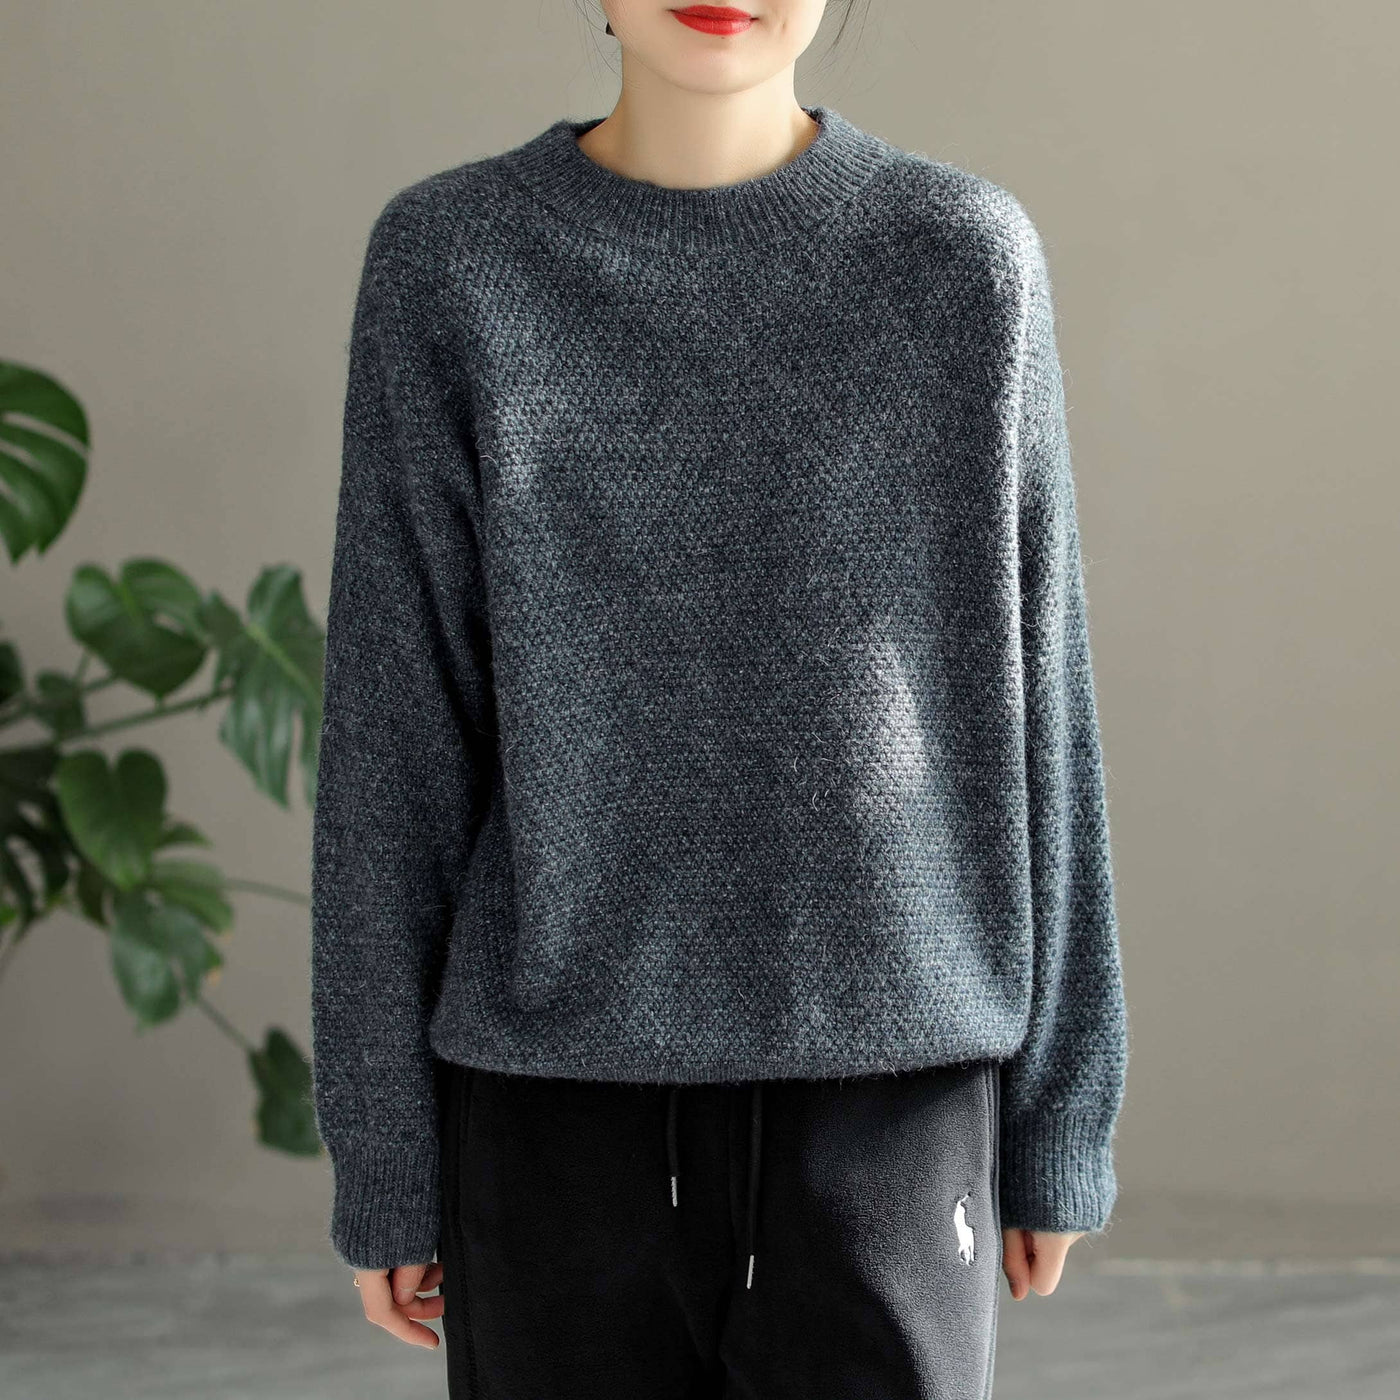 Women Solid Loose Knitted Autumn Winter Warm Sweater Jan 2023 New Arrival One Size Dark Gray 